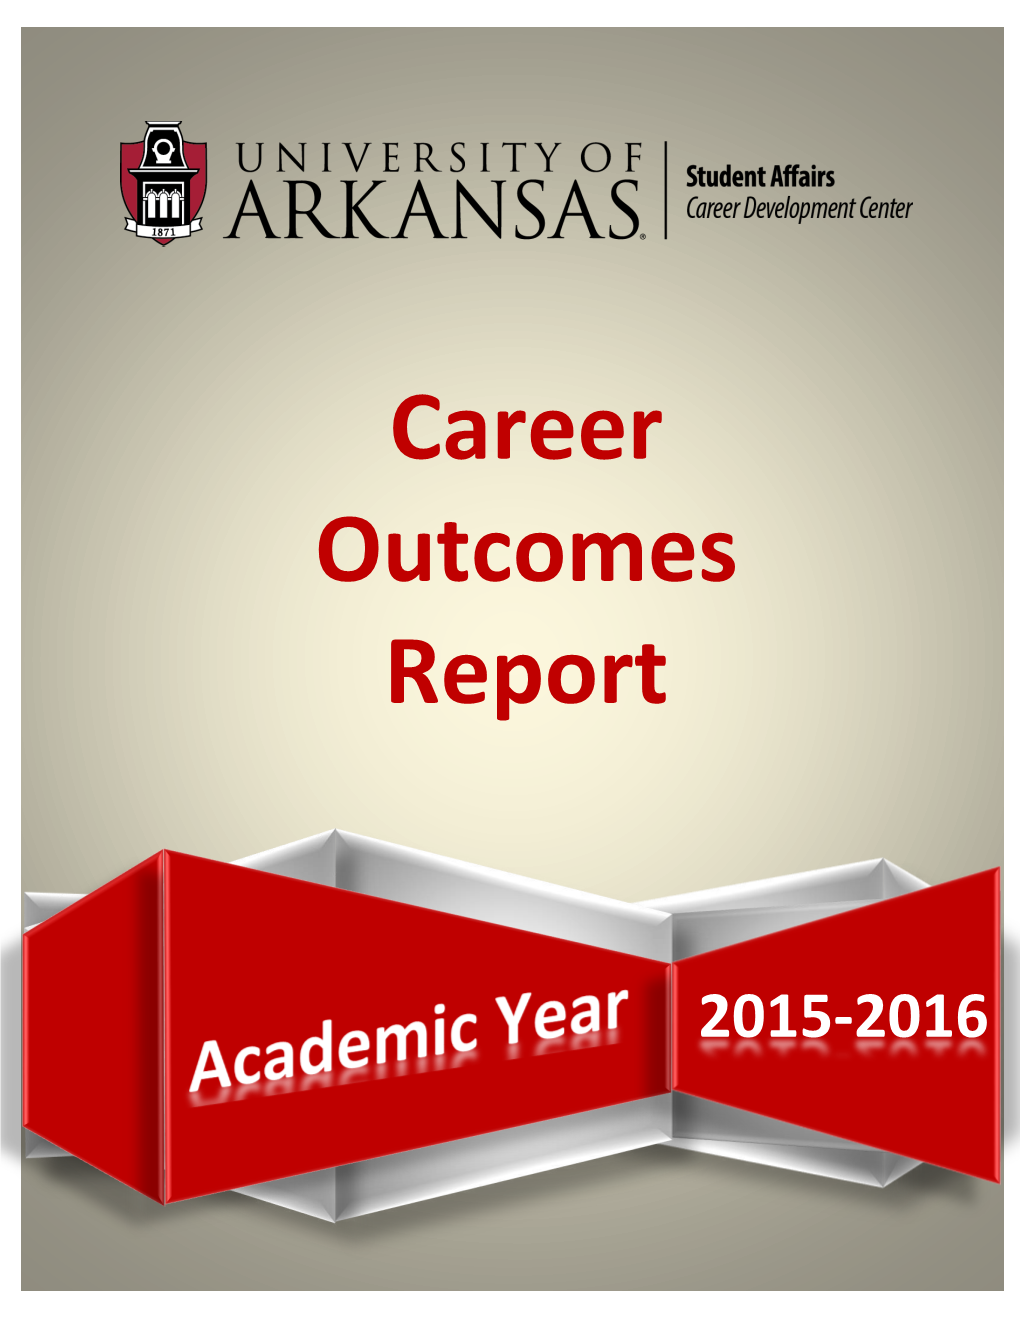 Career Outcomes Report]